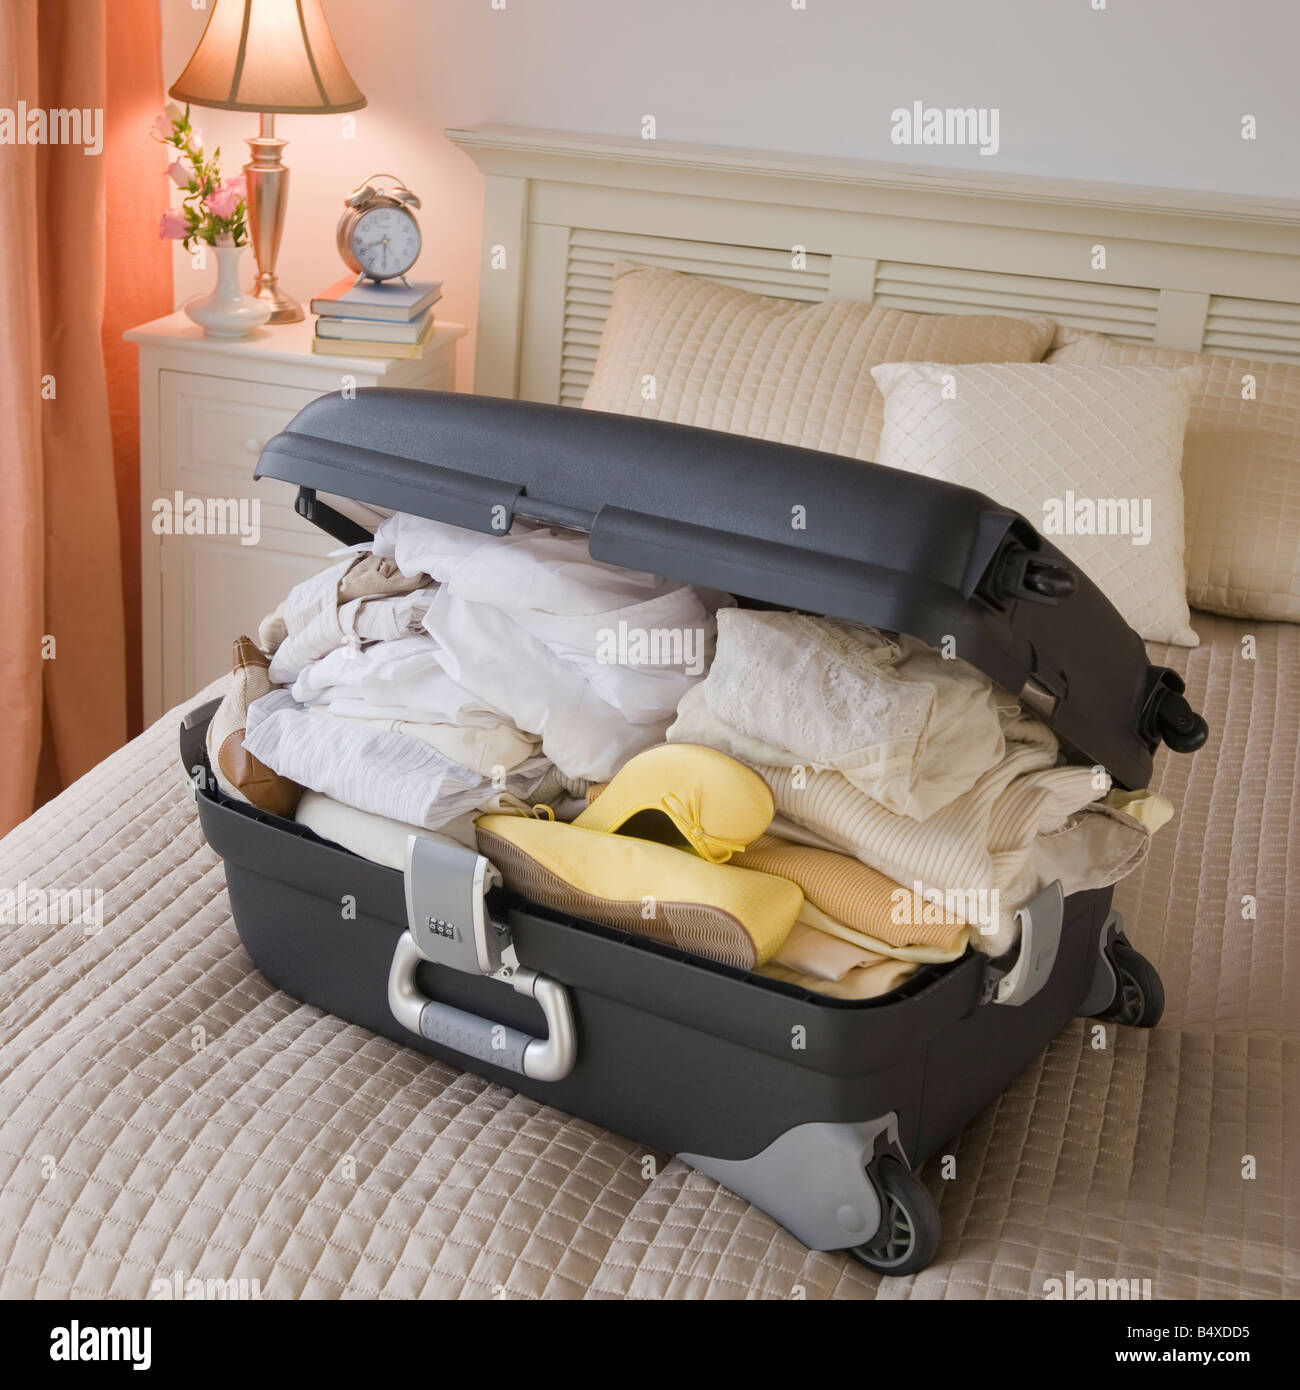 Full suitcase on bed Stock Photo